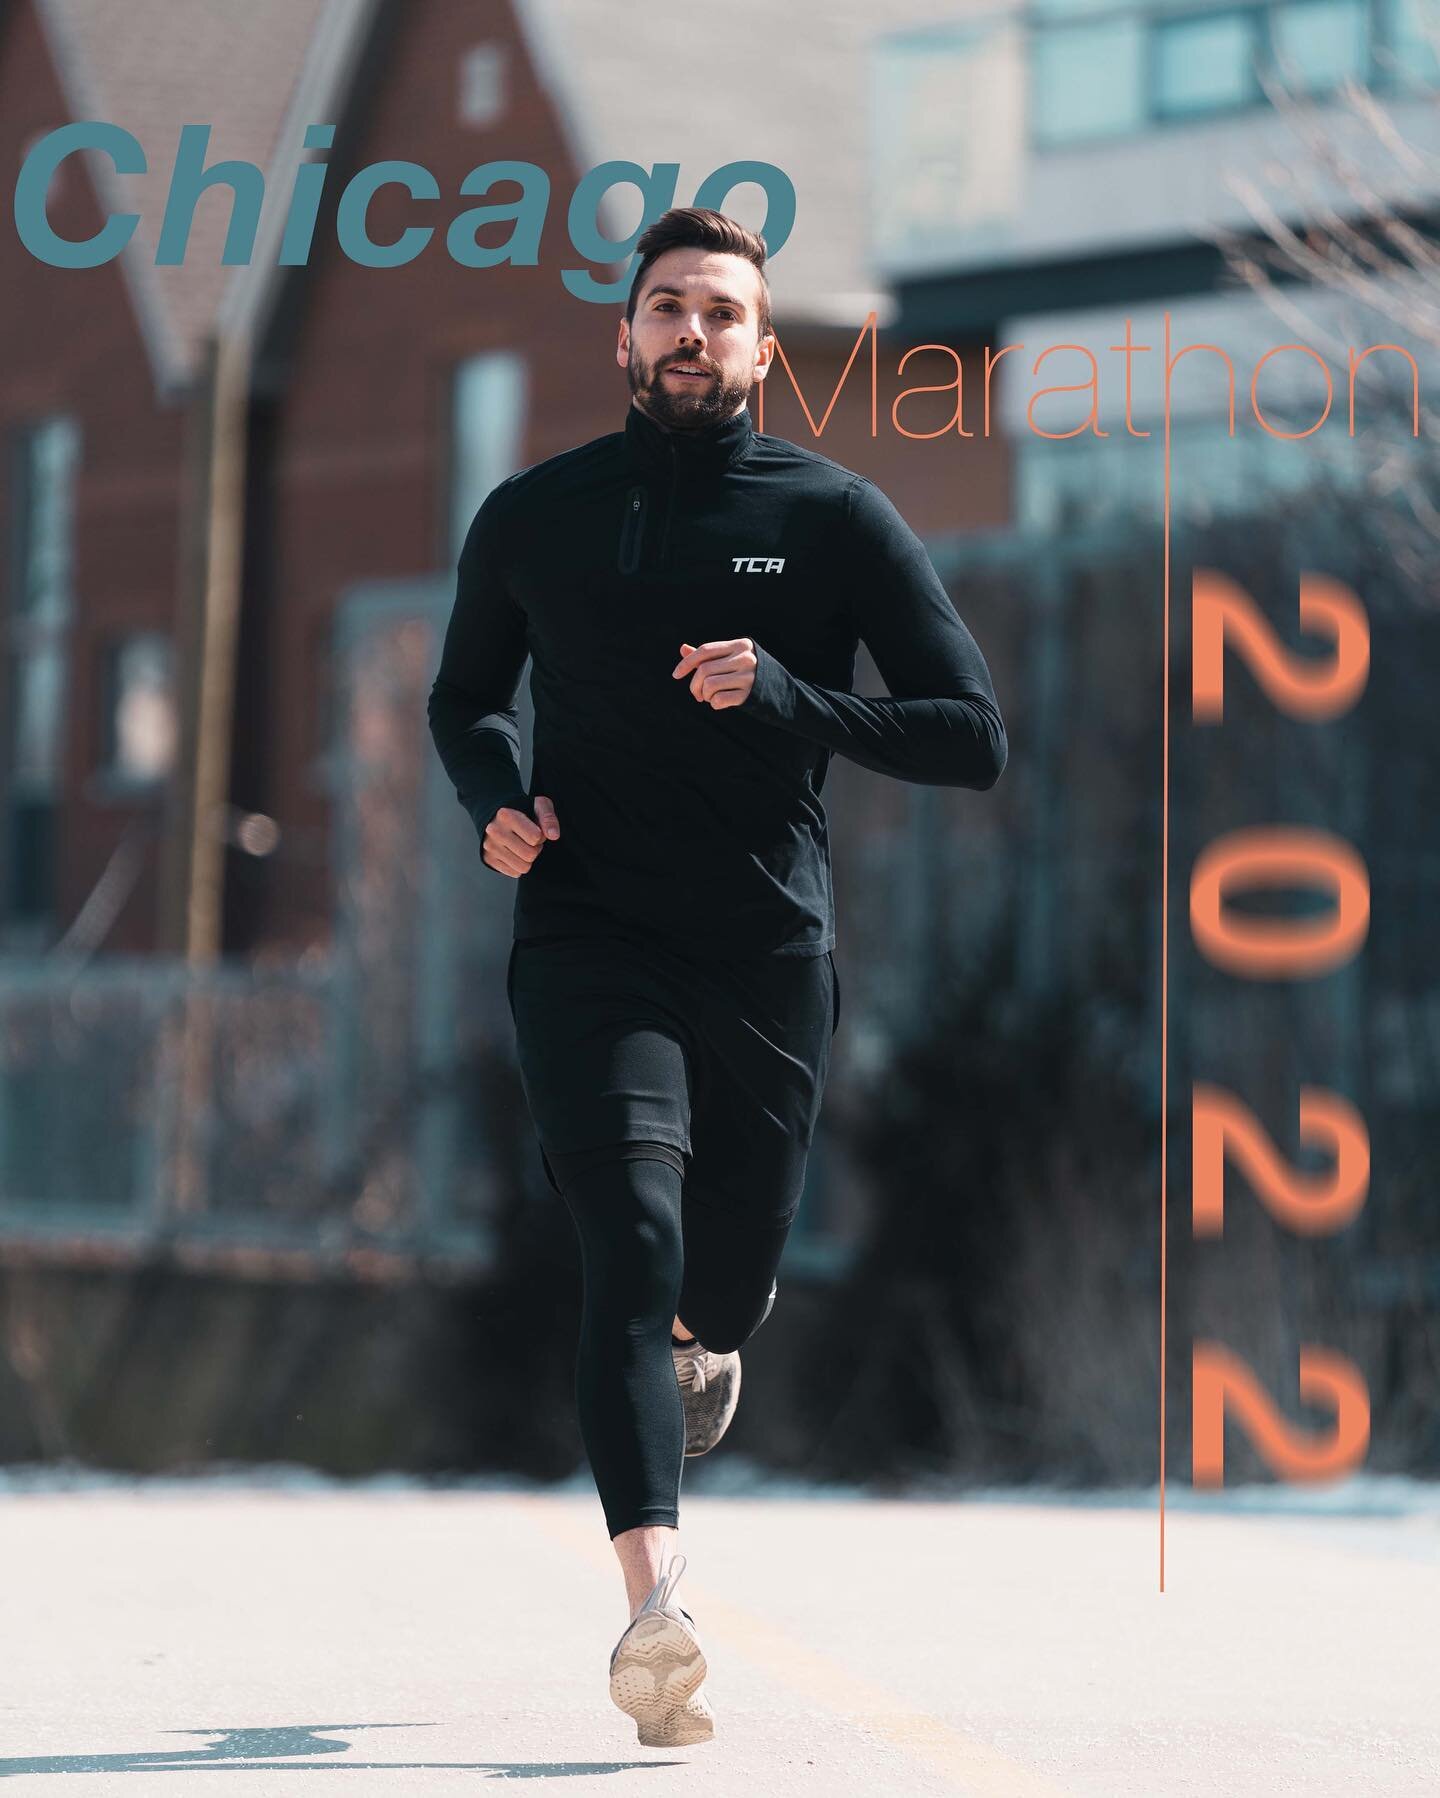 My good frand @wveliz18 will be running the @chimarathon this year, and he&rsquo;s pledged to raise money for the @amdiabetesassn - feel free to go check out the link n his bio and donate if you&rsquo;re feeling generous 🤙🏻

#chicagomarathon #sonya